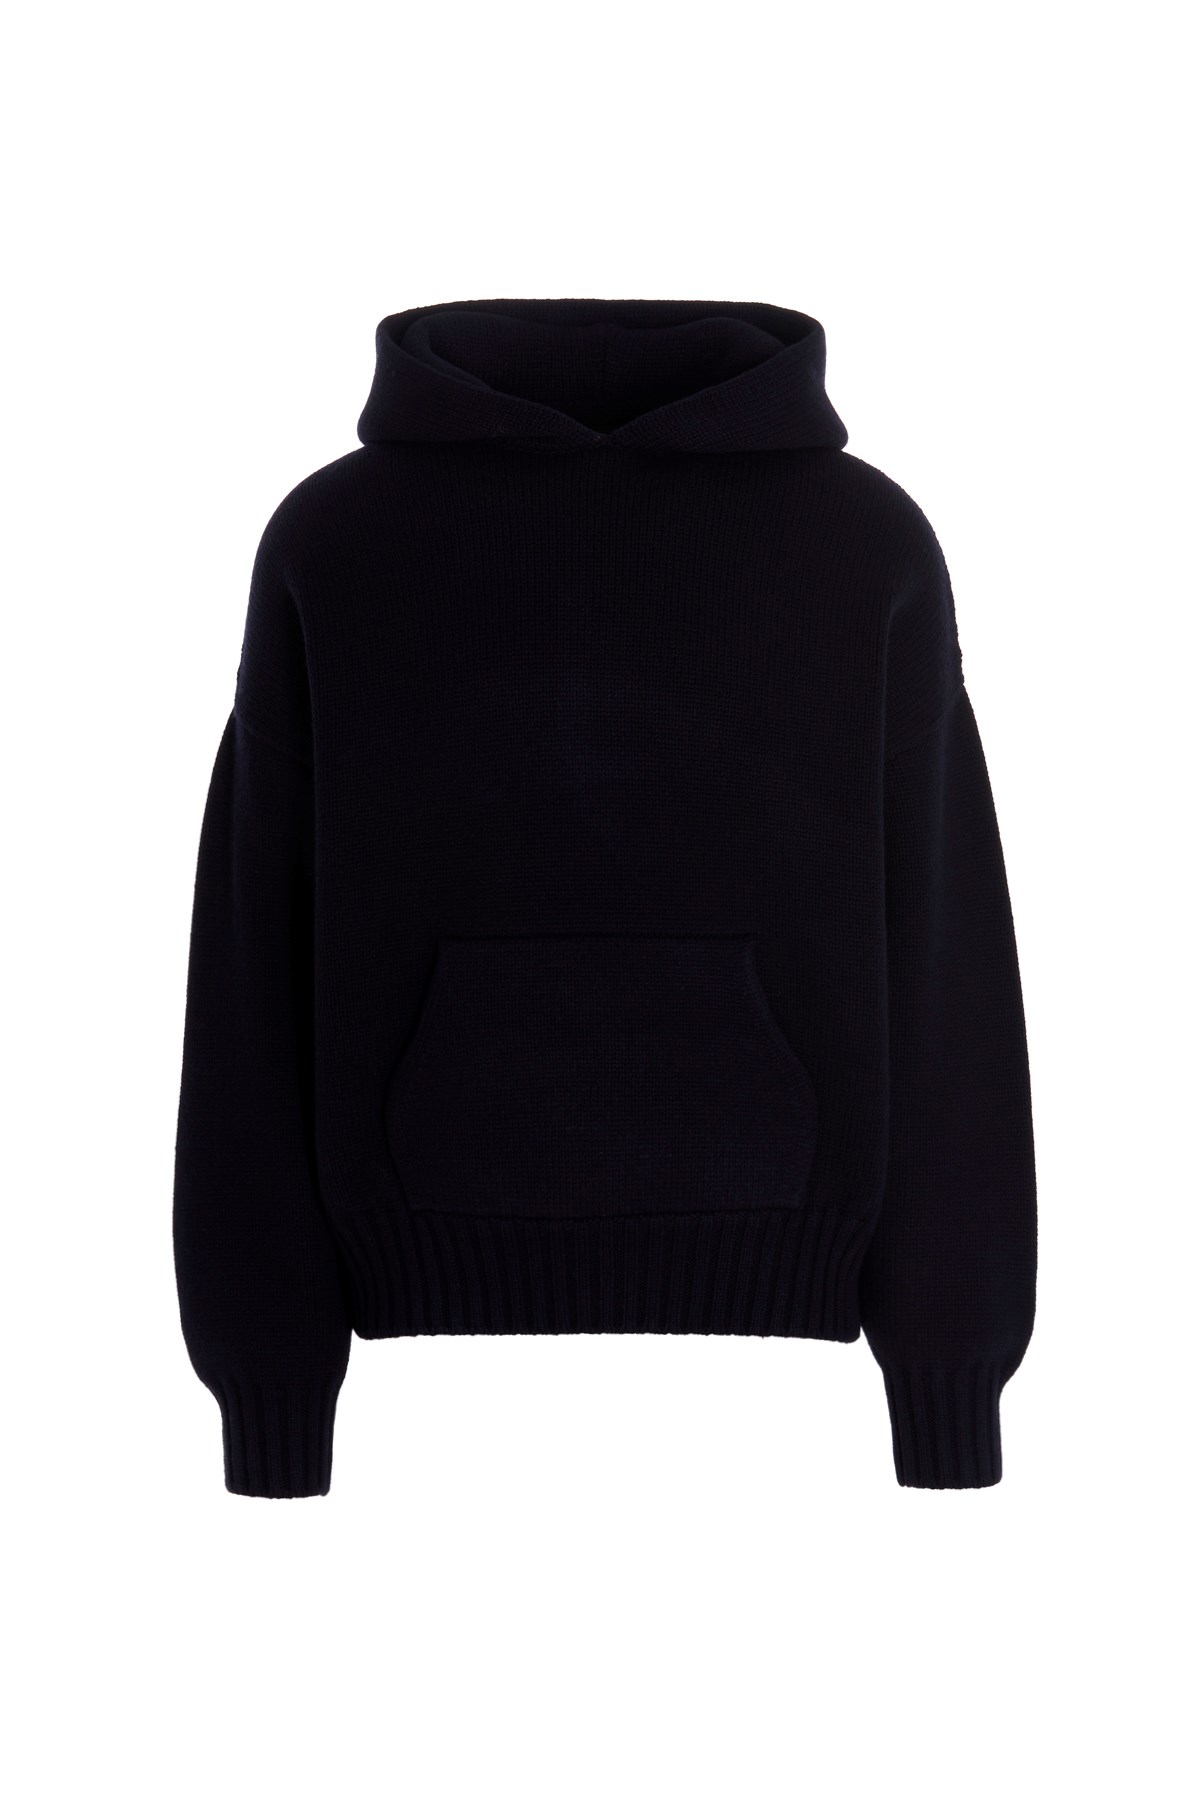 FEAR OF GOD Pullover Aus Wolle Mit Kapuze